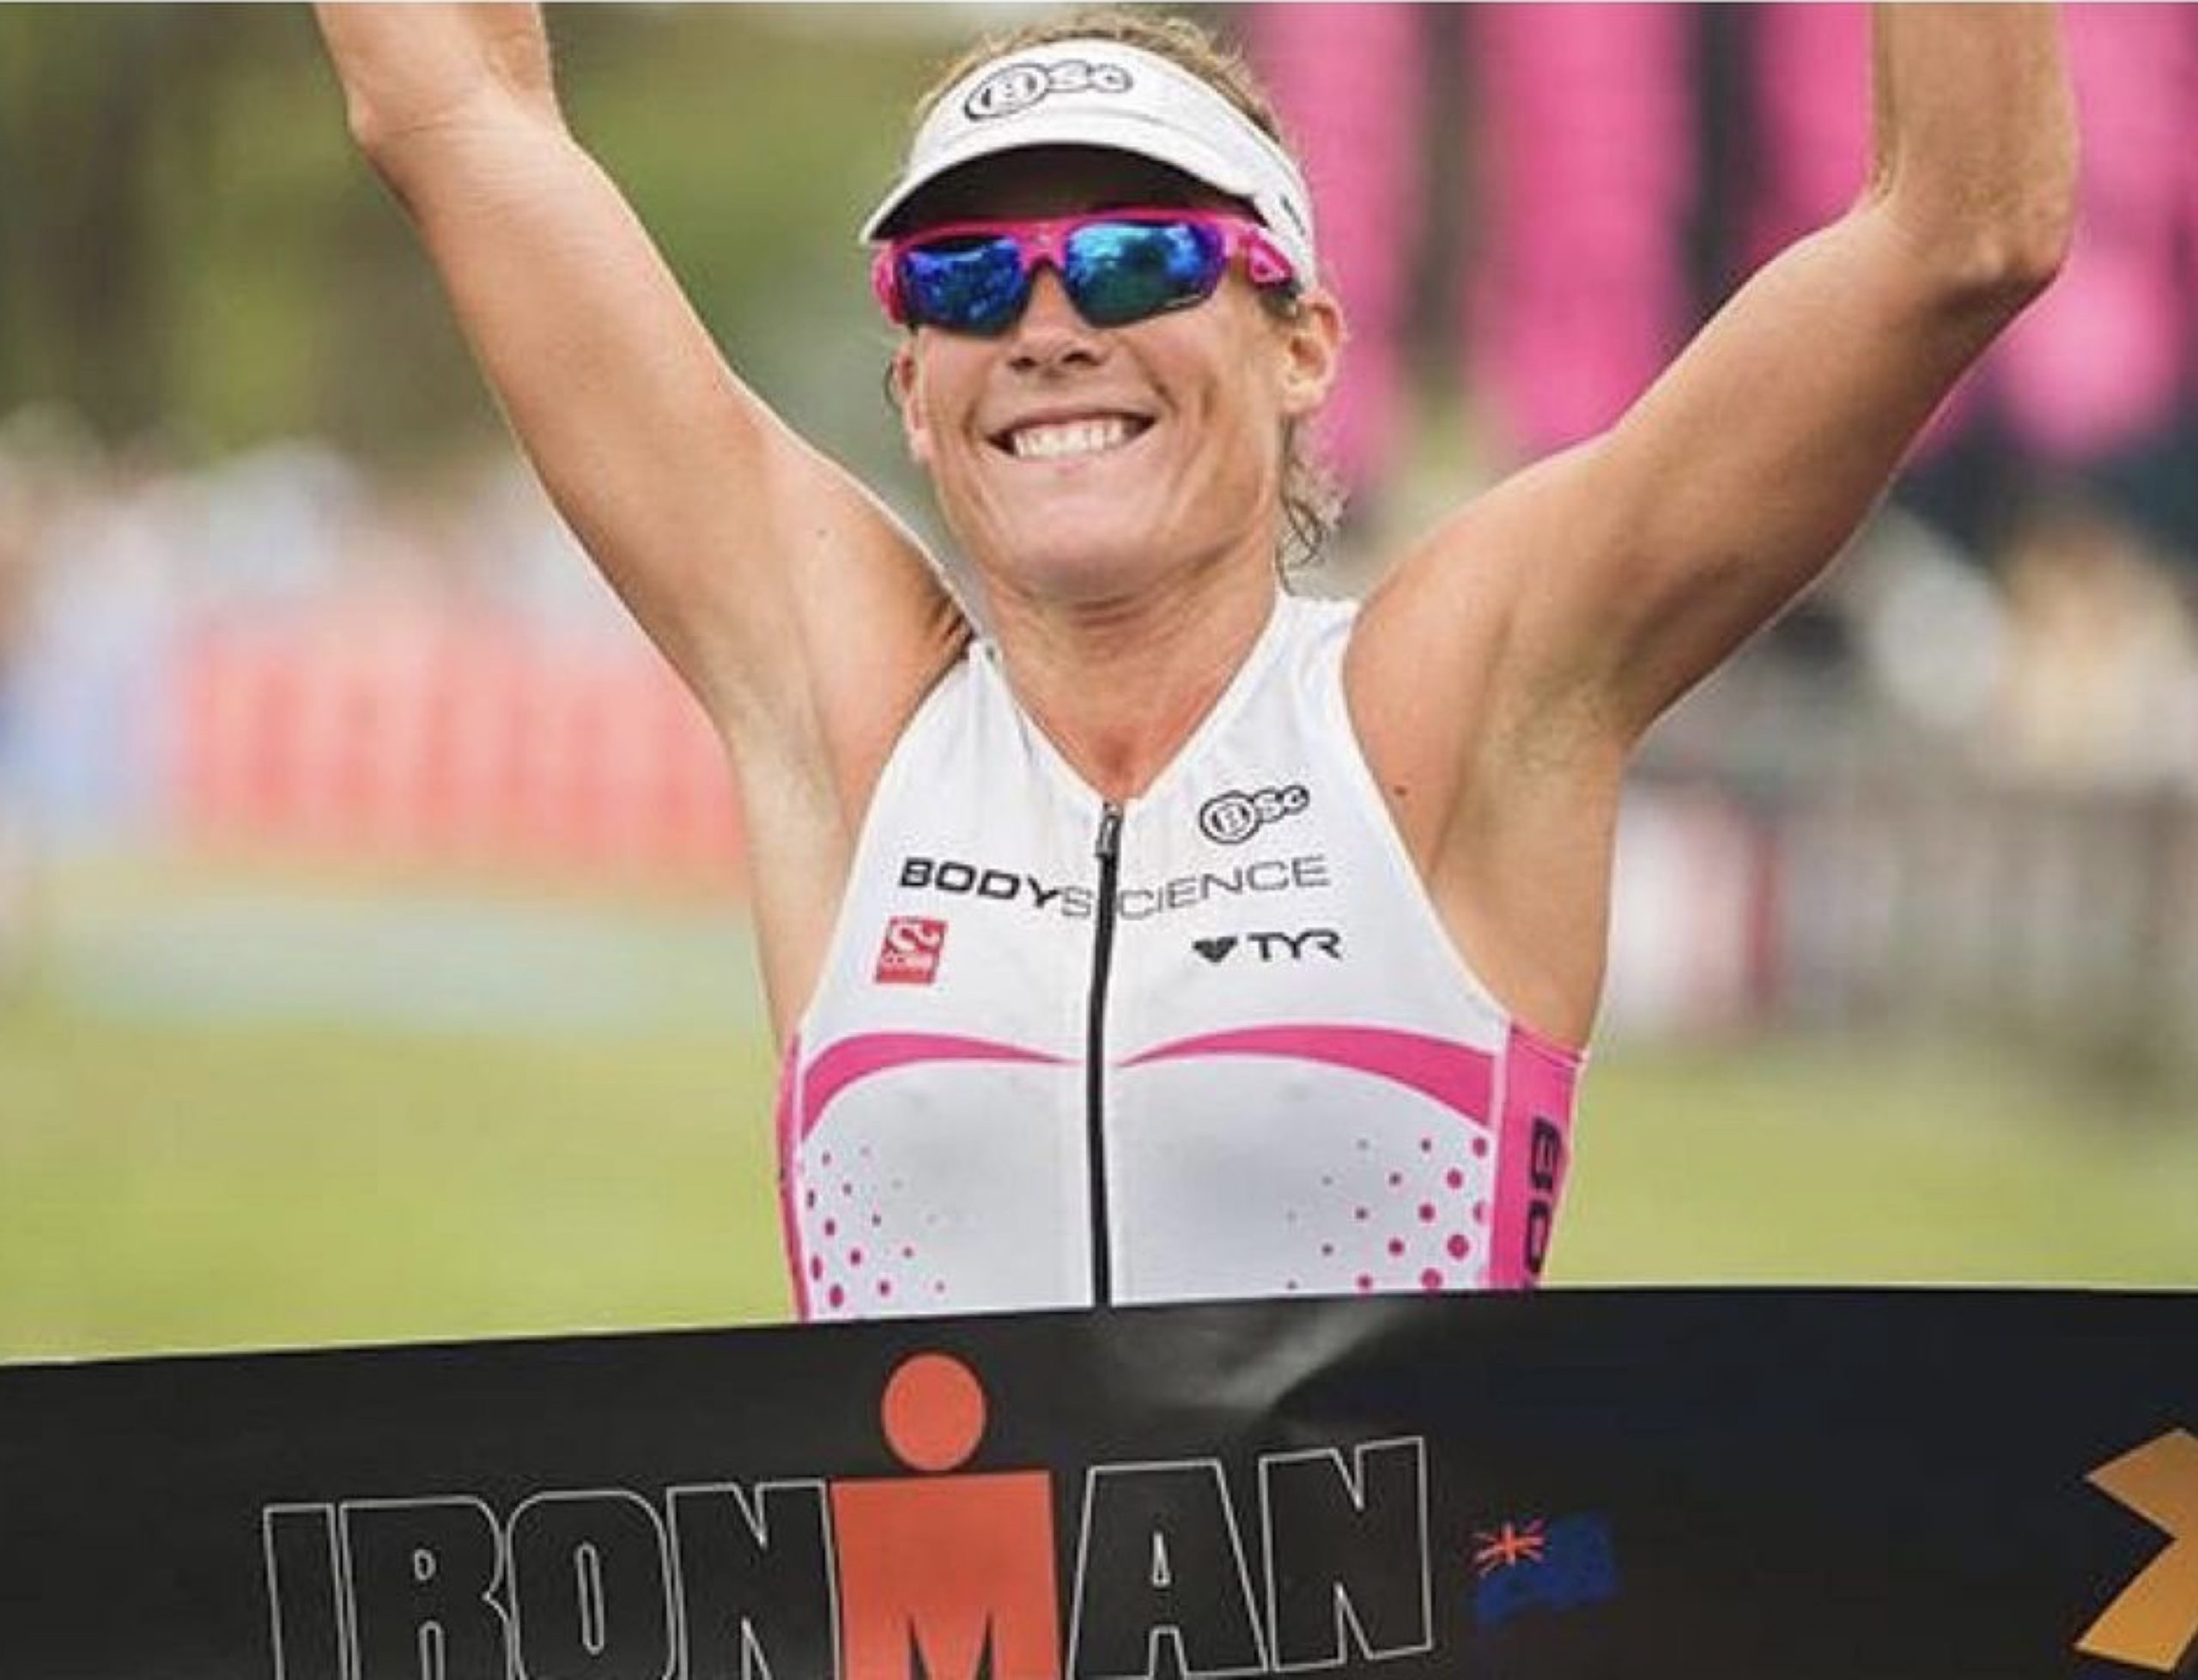 Former Triathlon World Record Holder Rebekah Keat shares her training guide and plan taper week leading up to your big race.